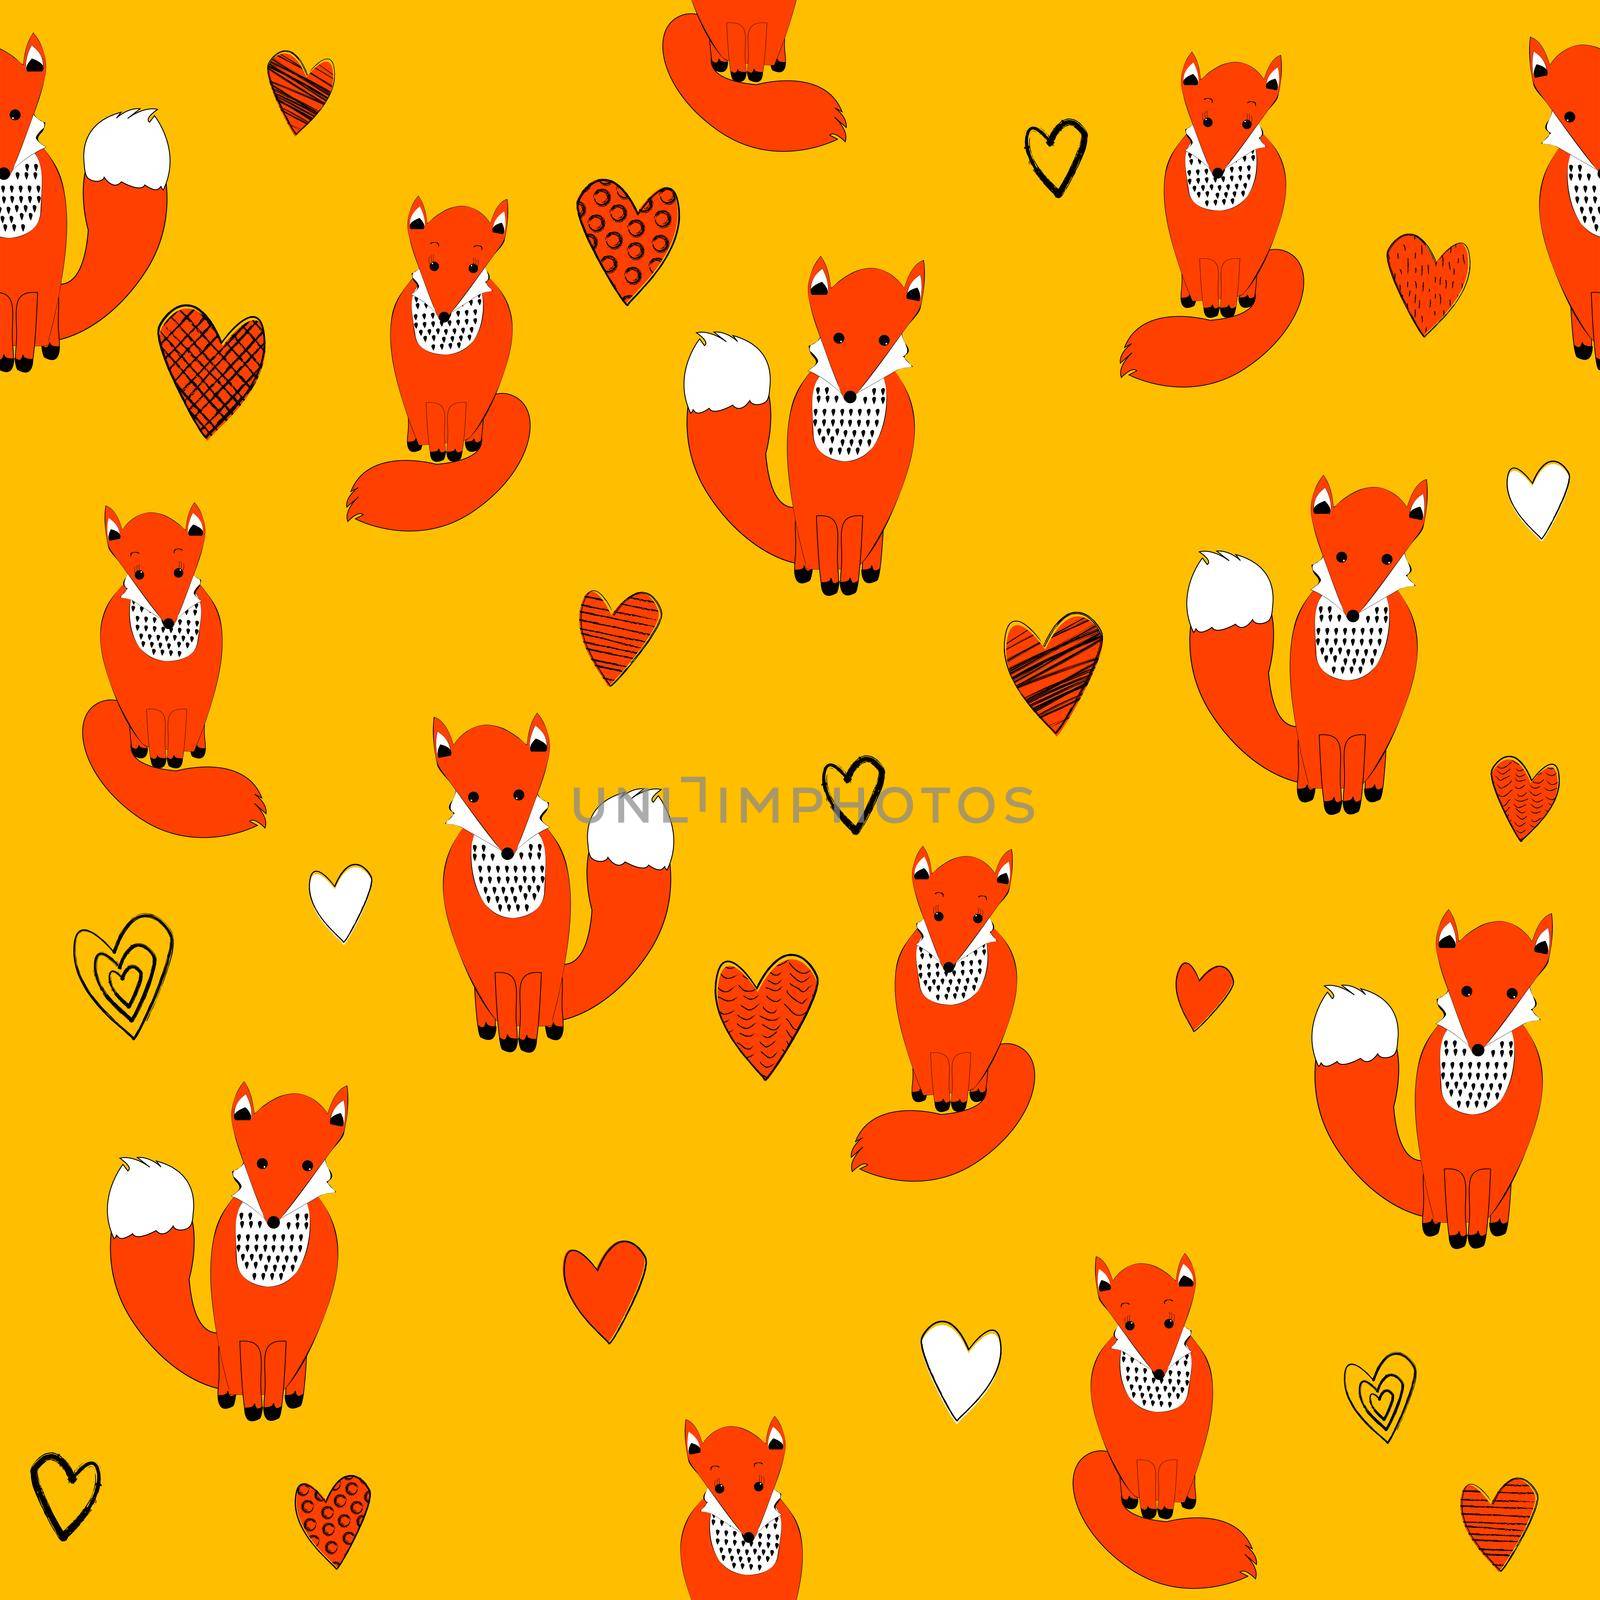 Colorful seamless pattern with hand drawn cartoon foxes by hibrida13